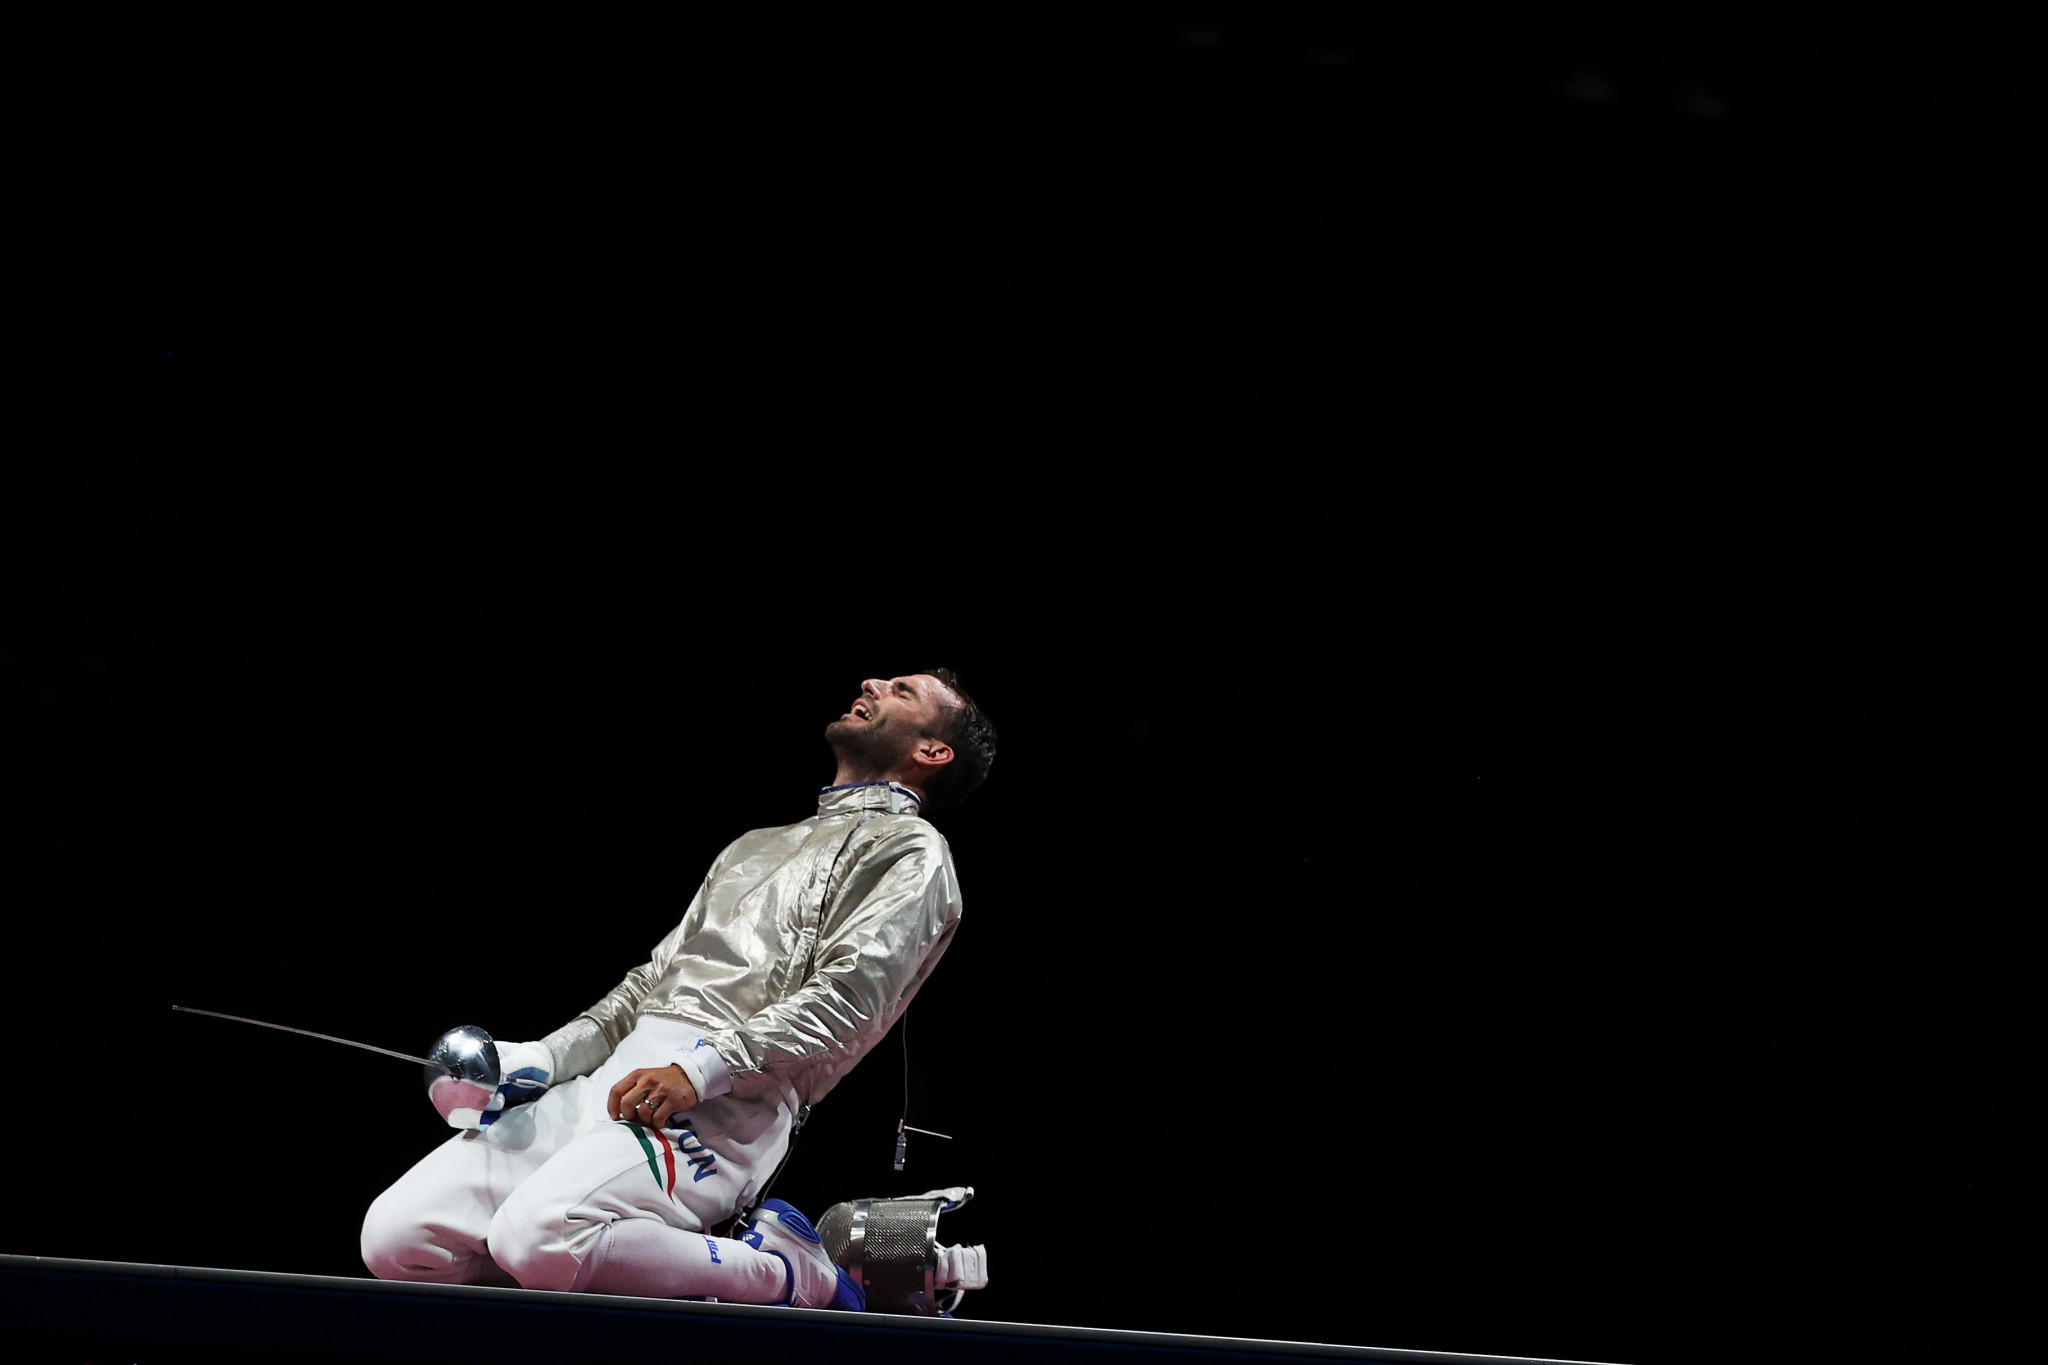 Szilágyi and Song take historic wins at Fencing World Championships